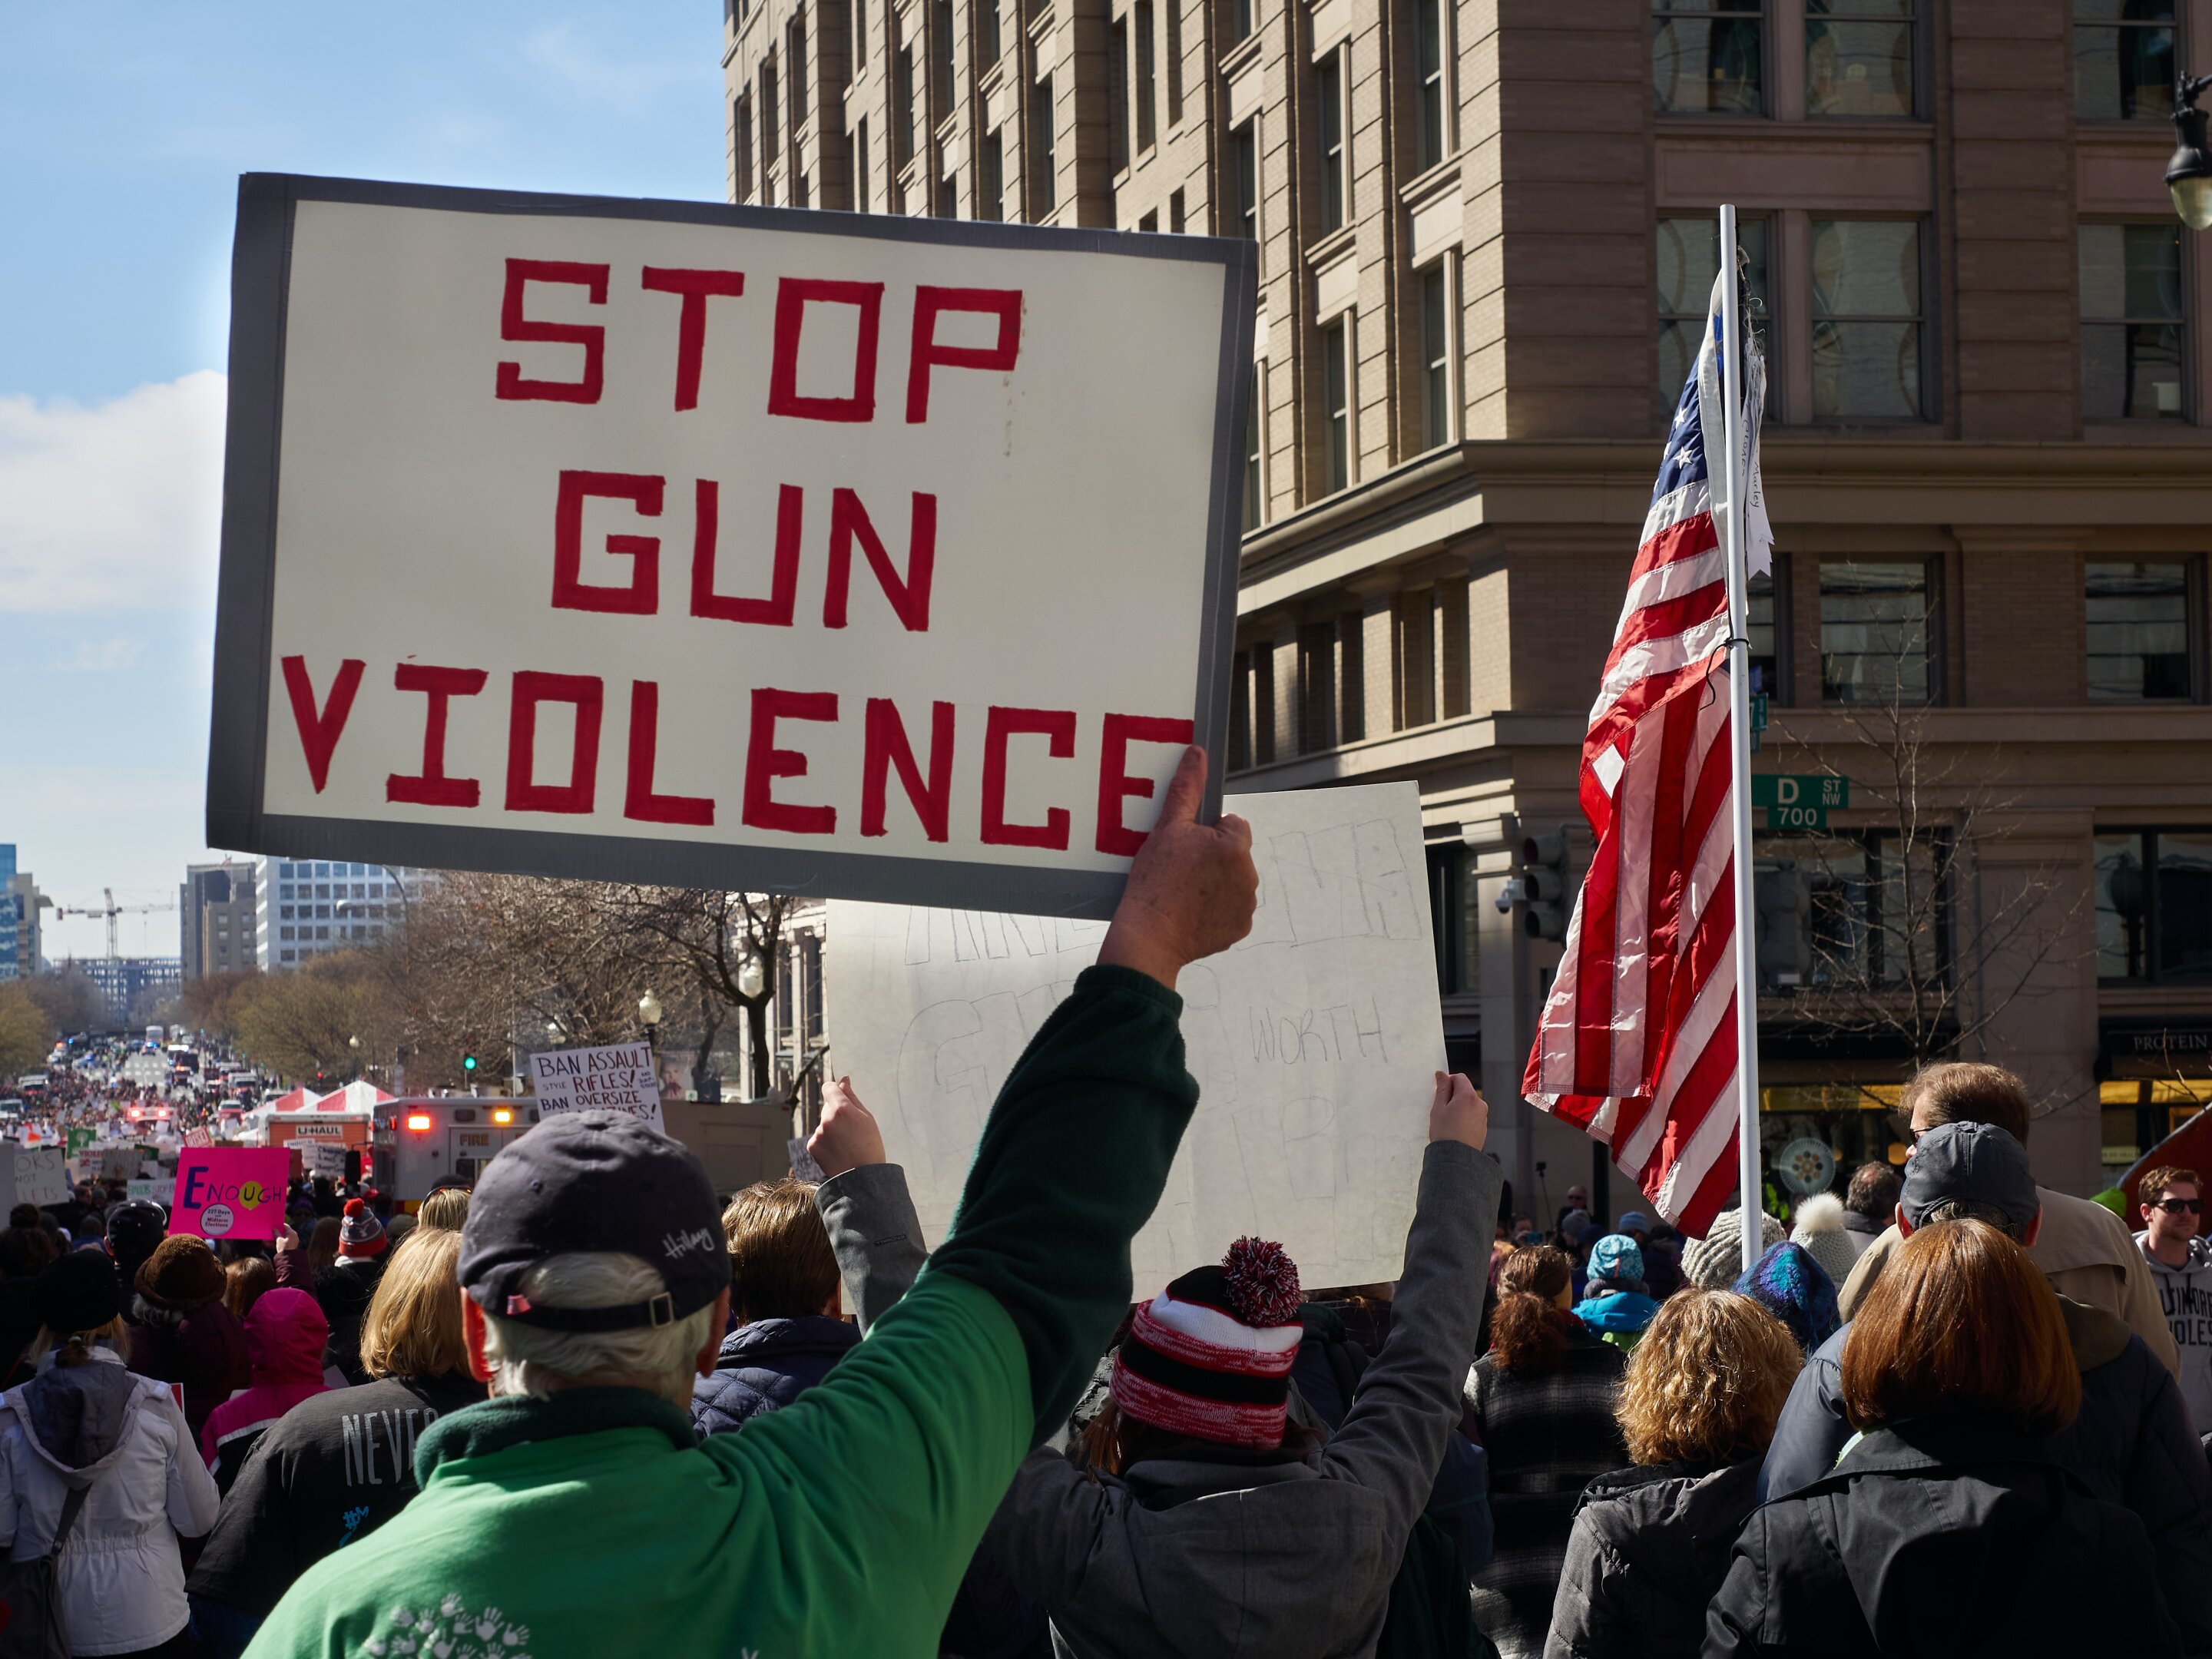 Poll: Attitudes towards gun violence affected by country of origin, race, and politics